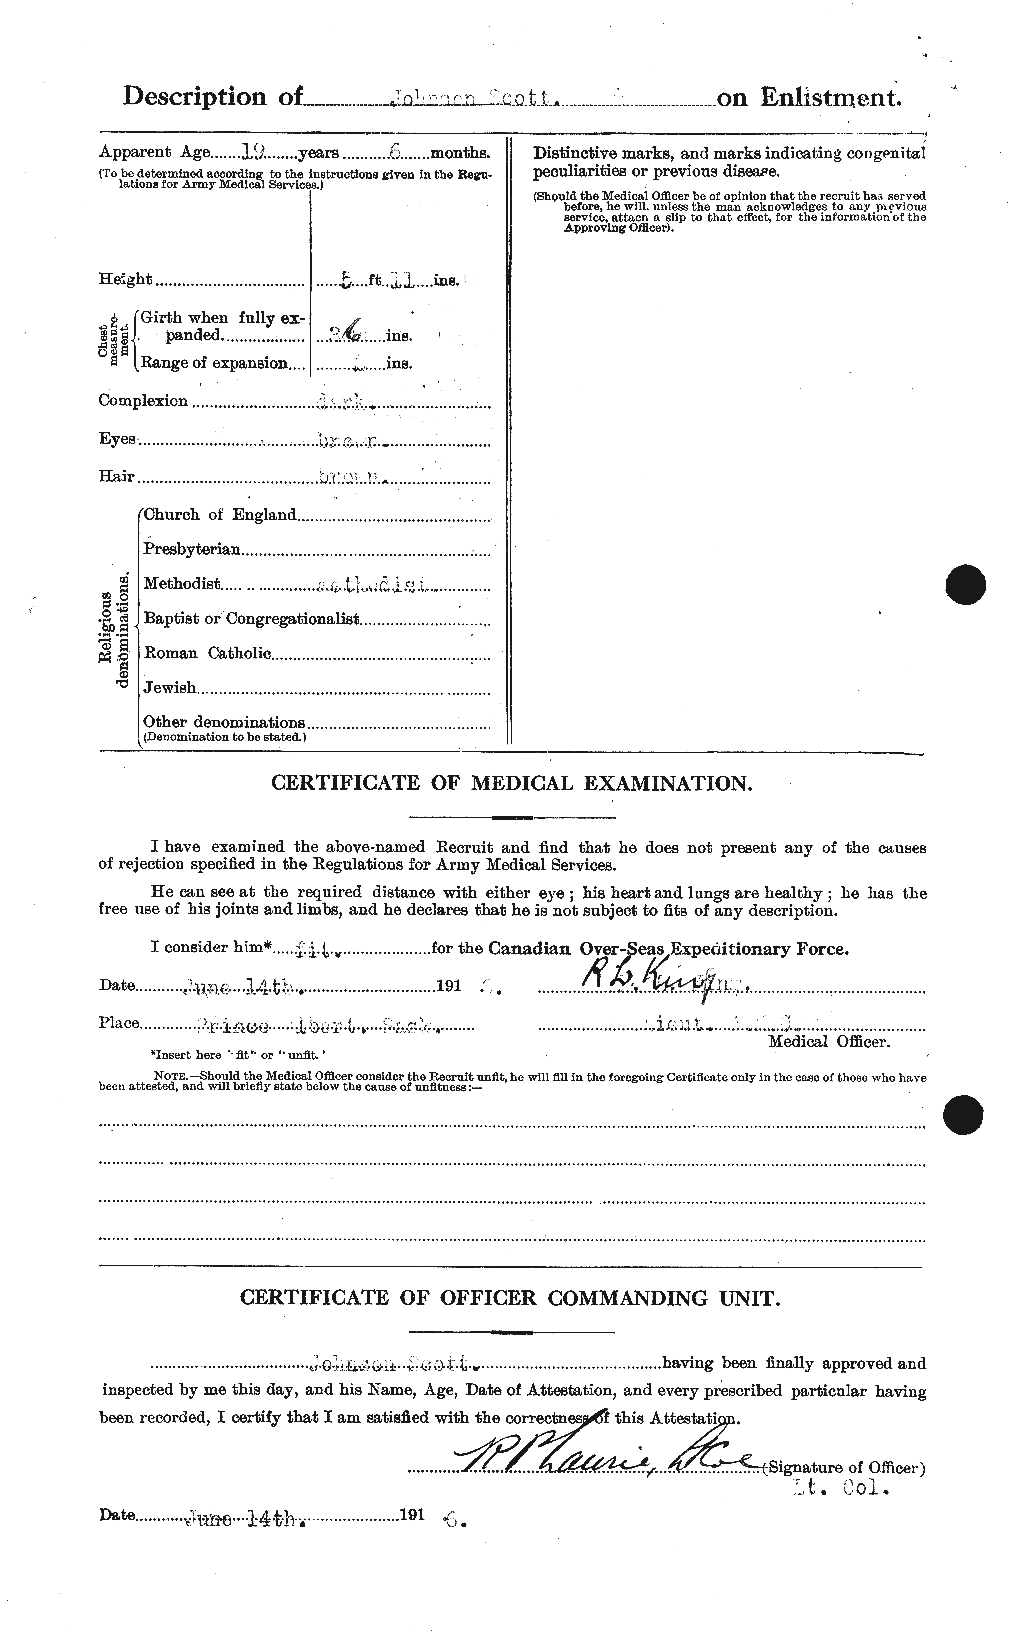 Personnel Records of the First World War - CEF 084184b